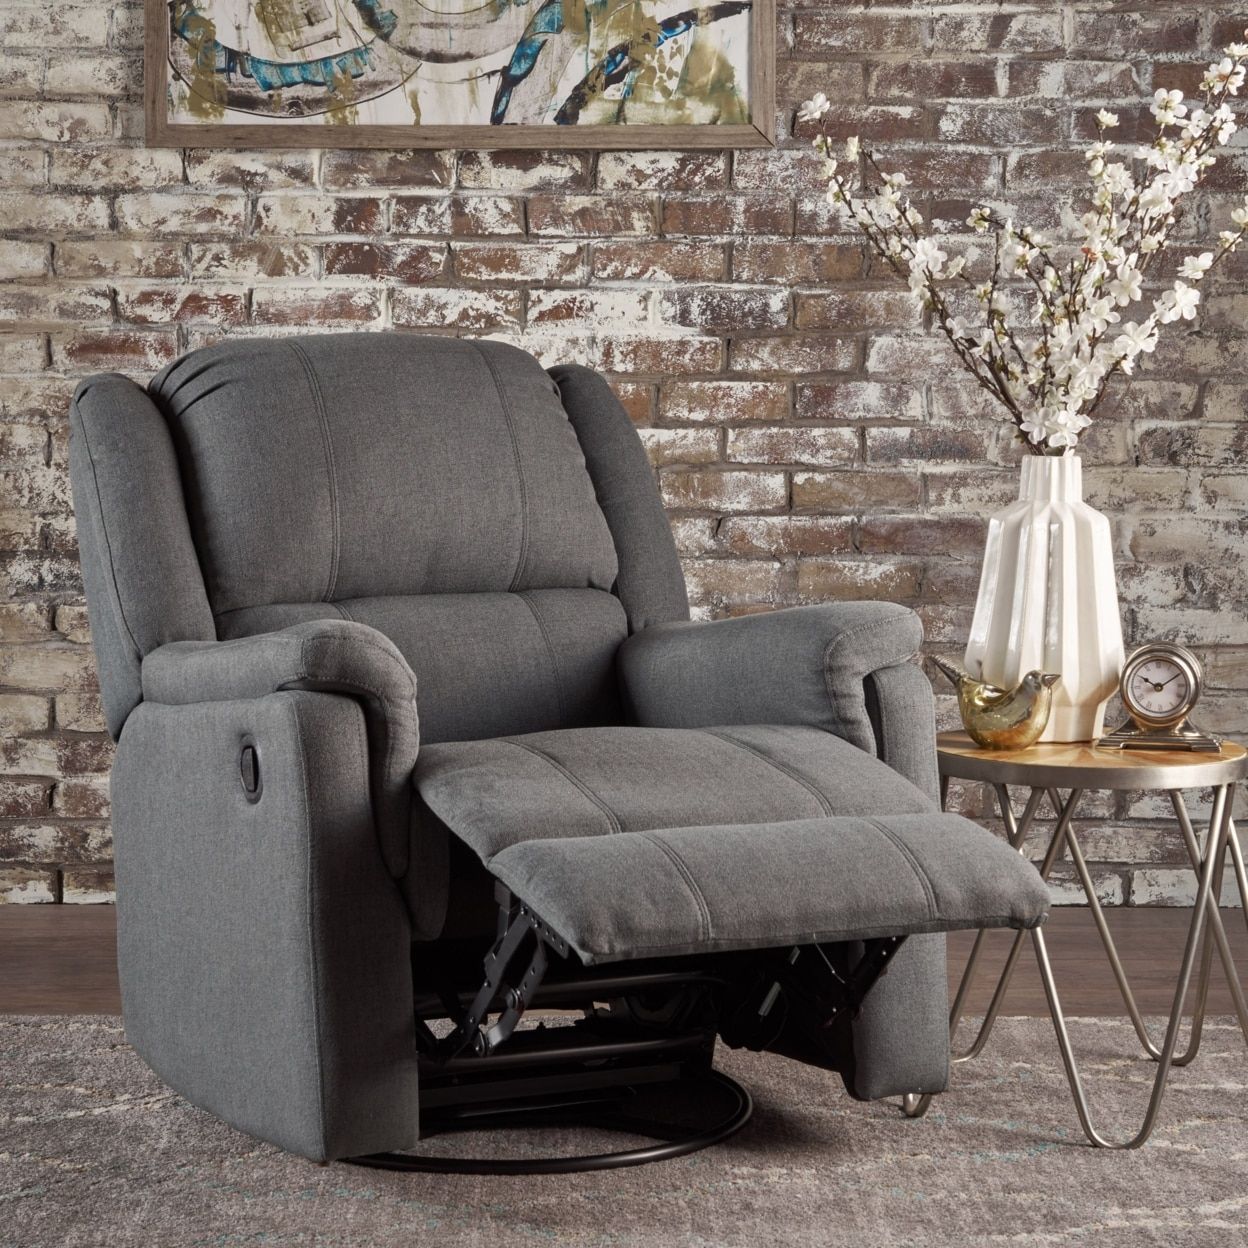 Jemma Tufted Fabric Swivel Gliding Recliner Chair In Living Room Throughout Decker Ii Fabric Swivel Rocker Recliners (View 10 of 25)